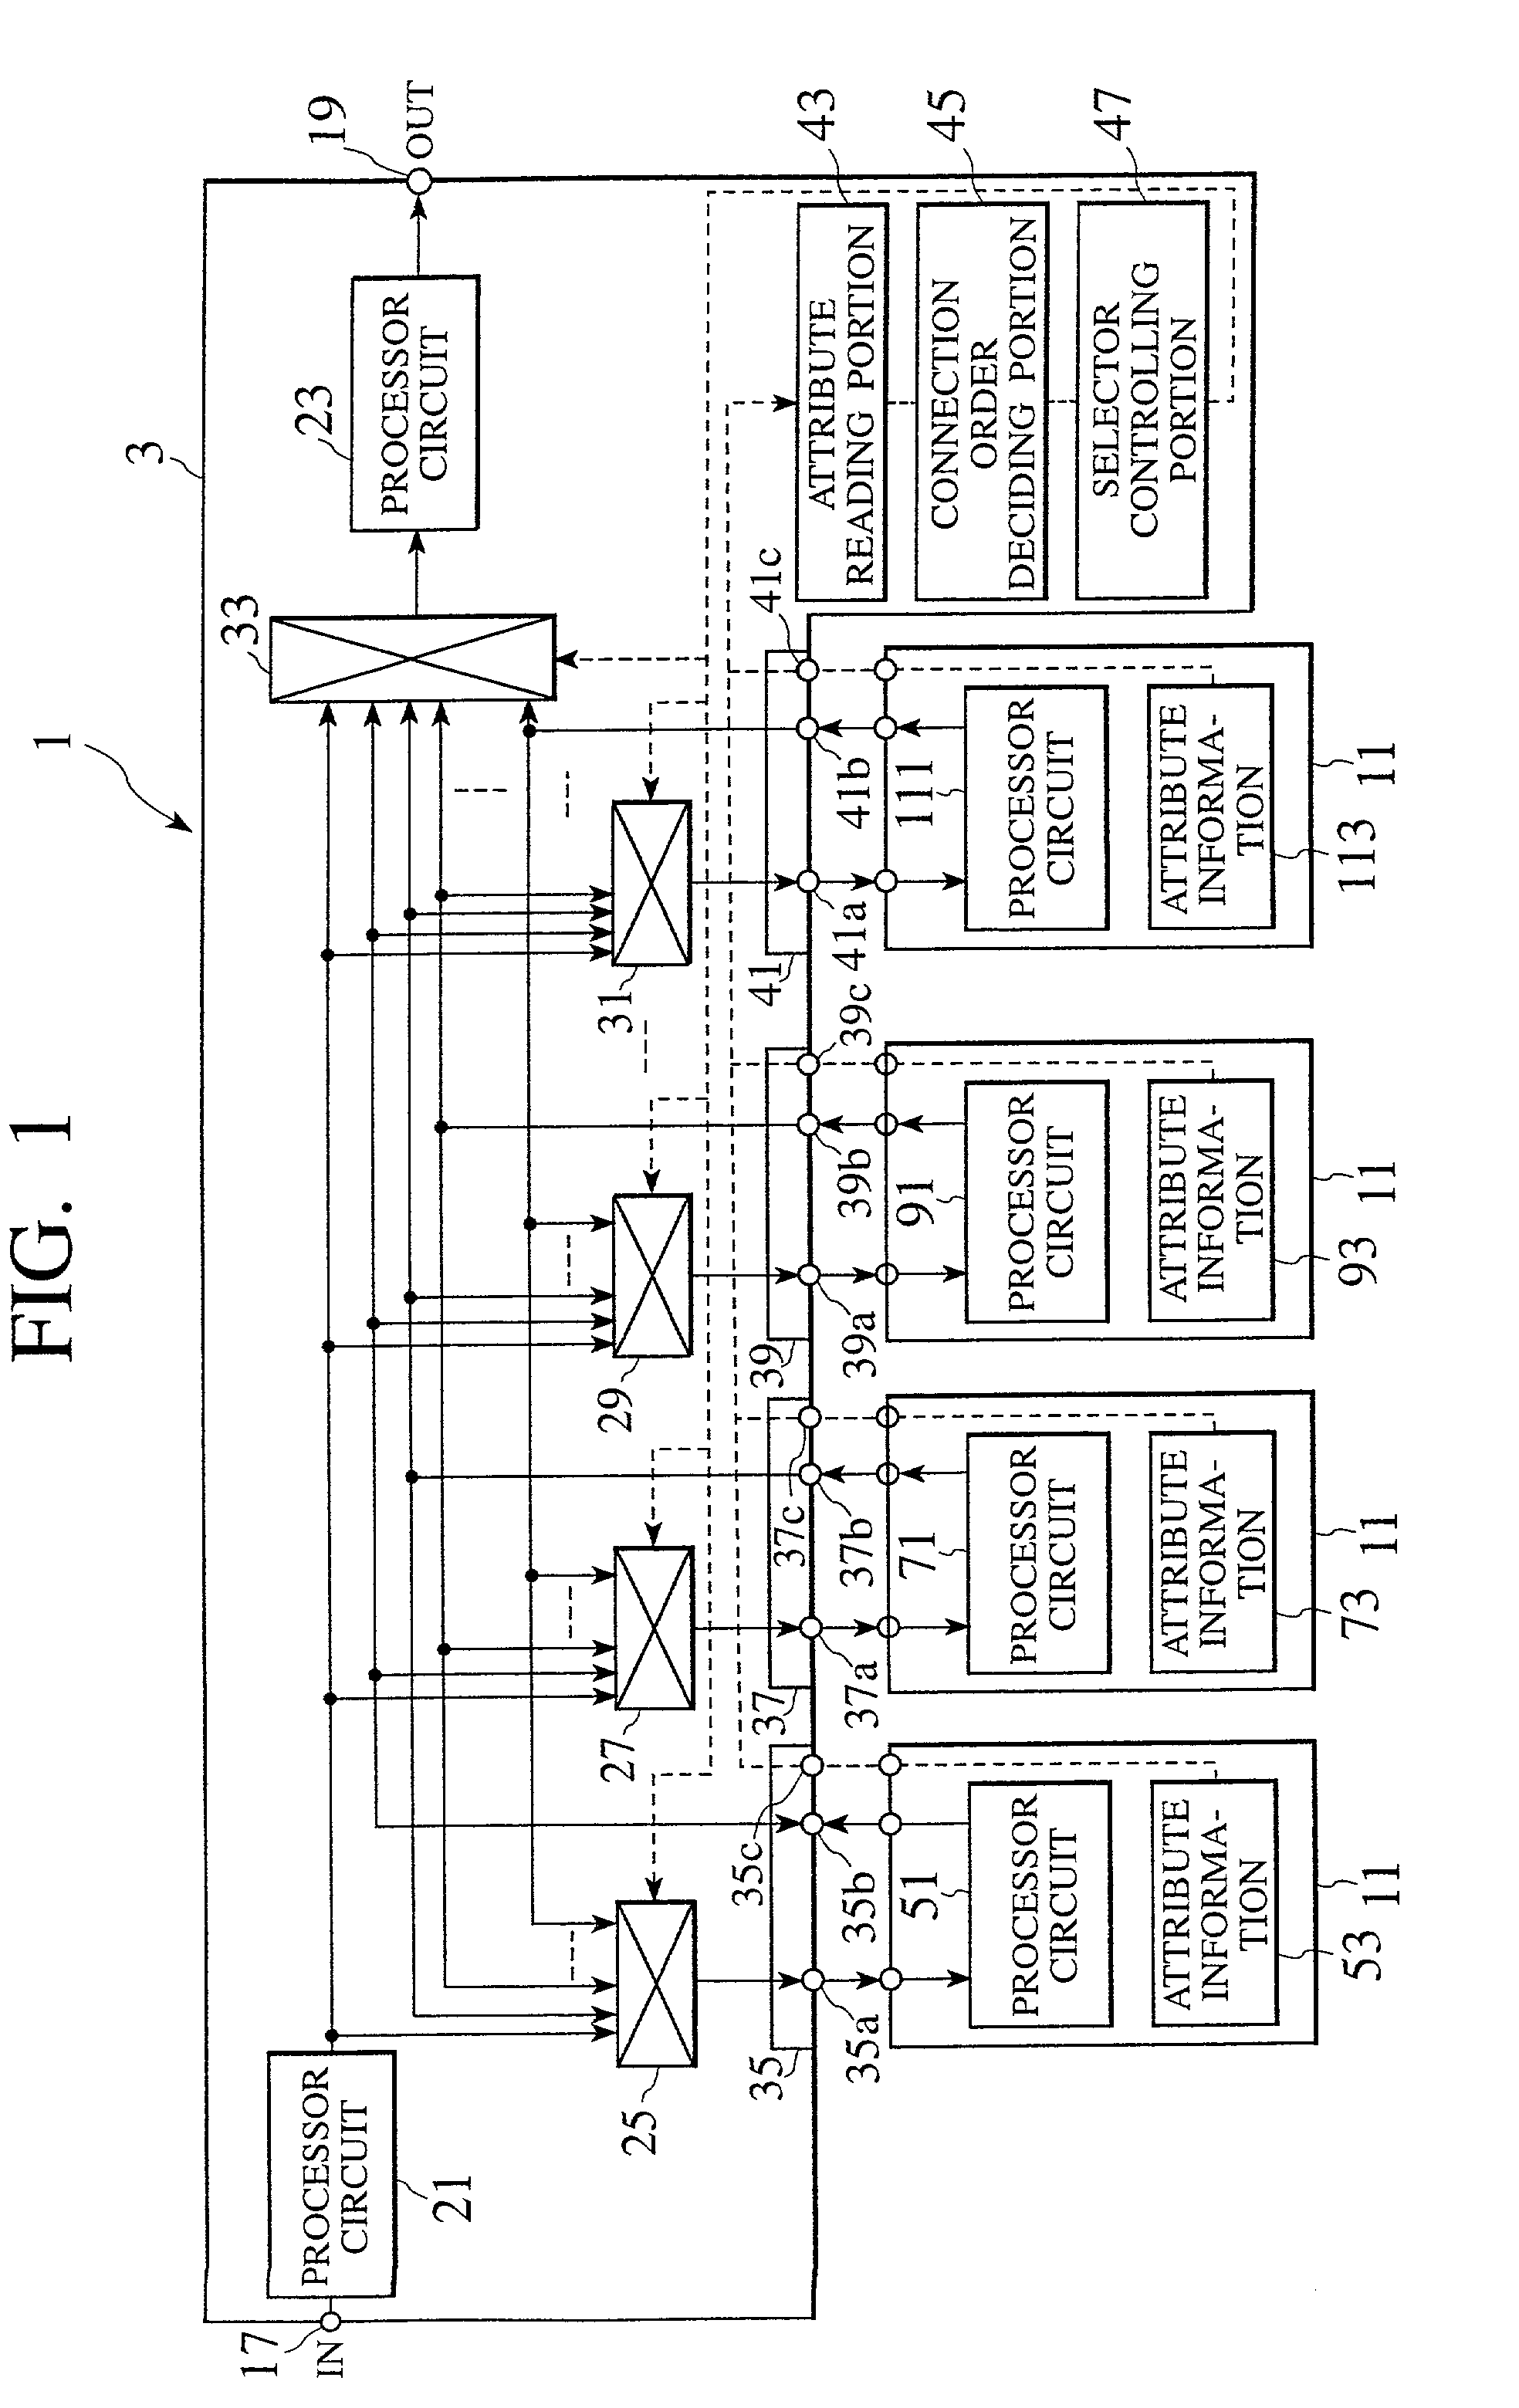 Signal processor unit and digital information receiver with detachable card module